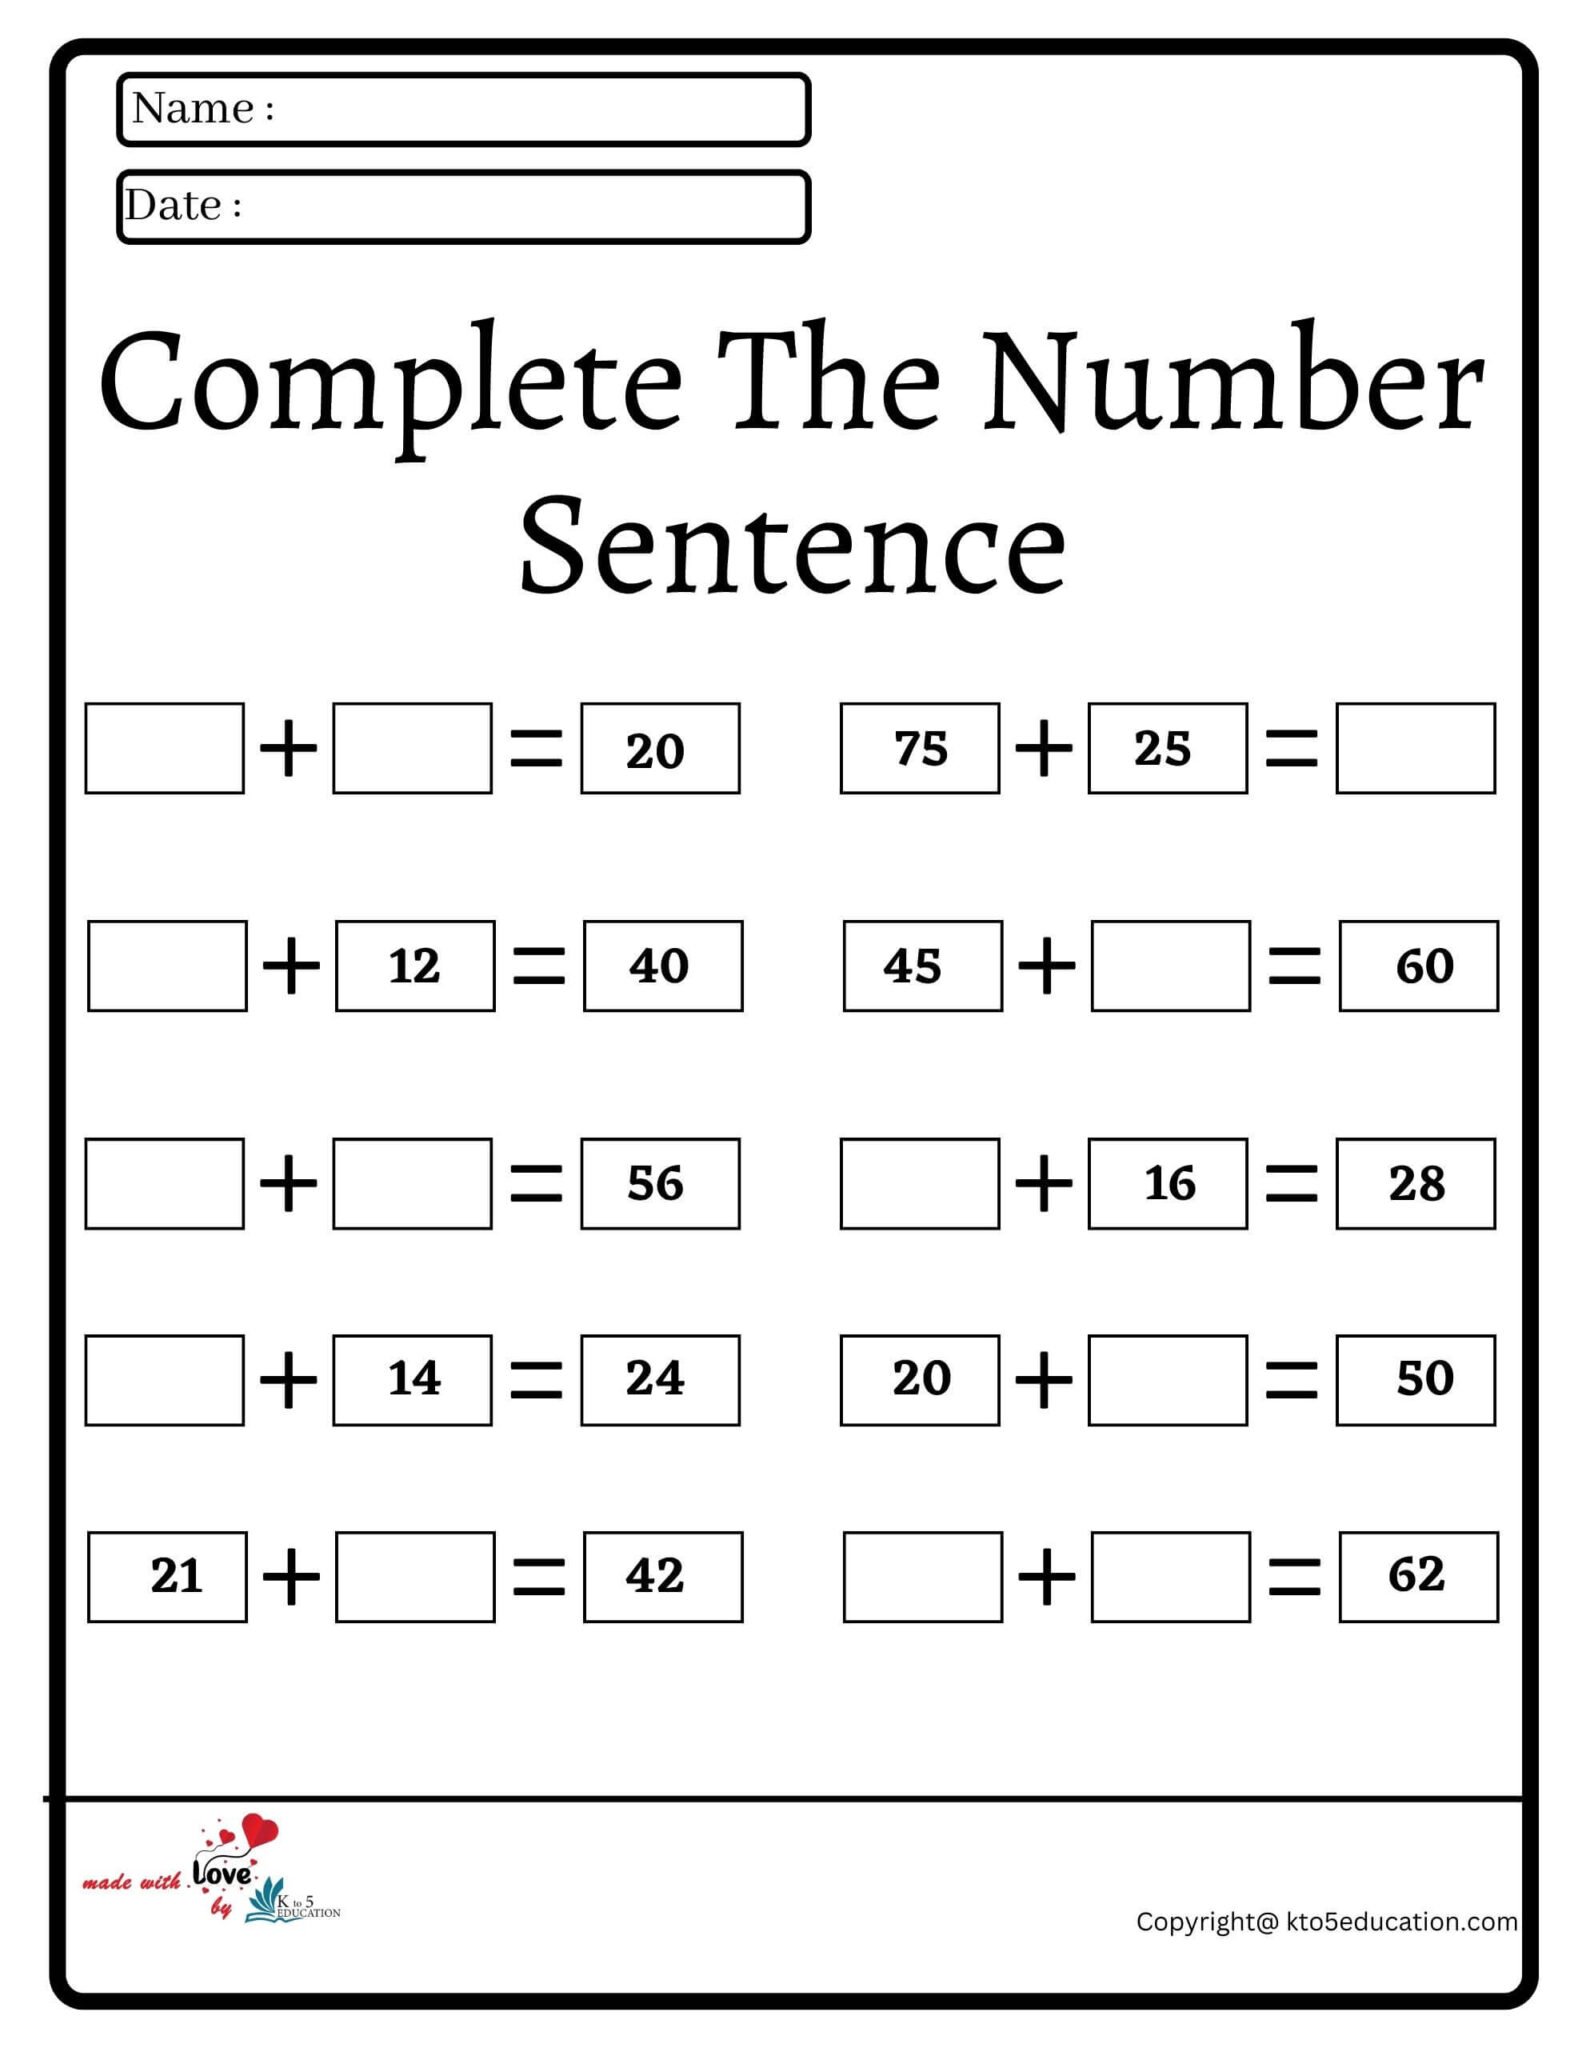 percentages-to-decimals-worksheets-practice-questions-and-answers-more-adding-fractions